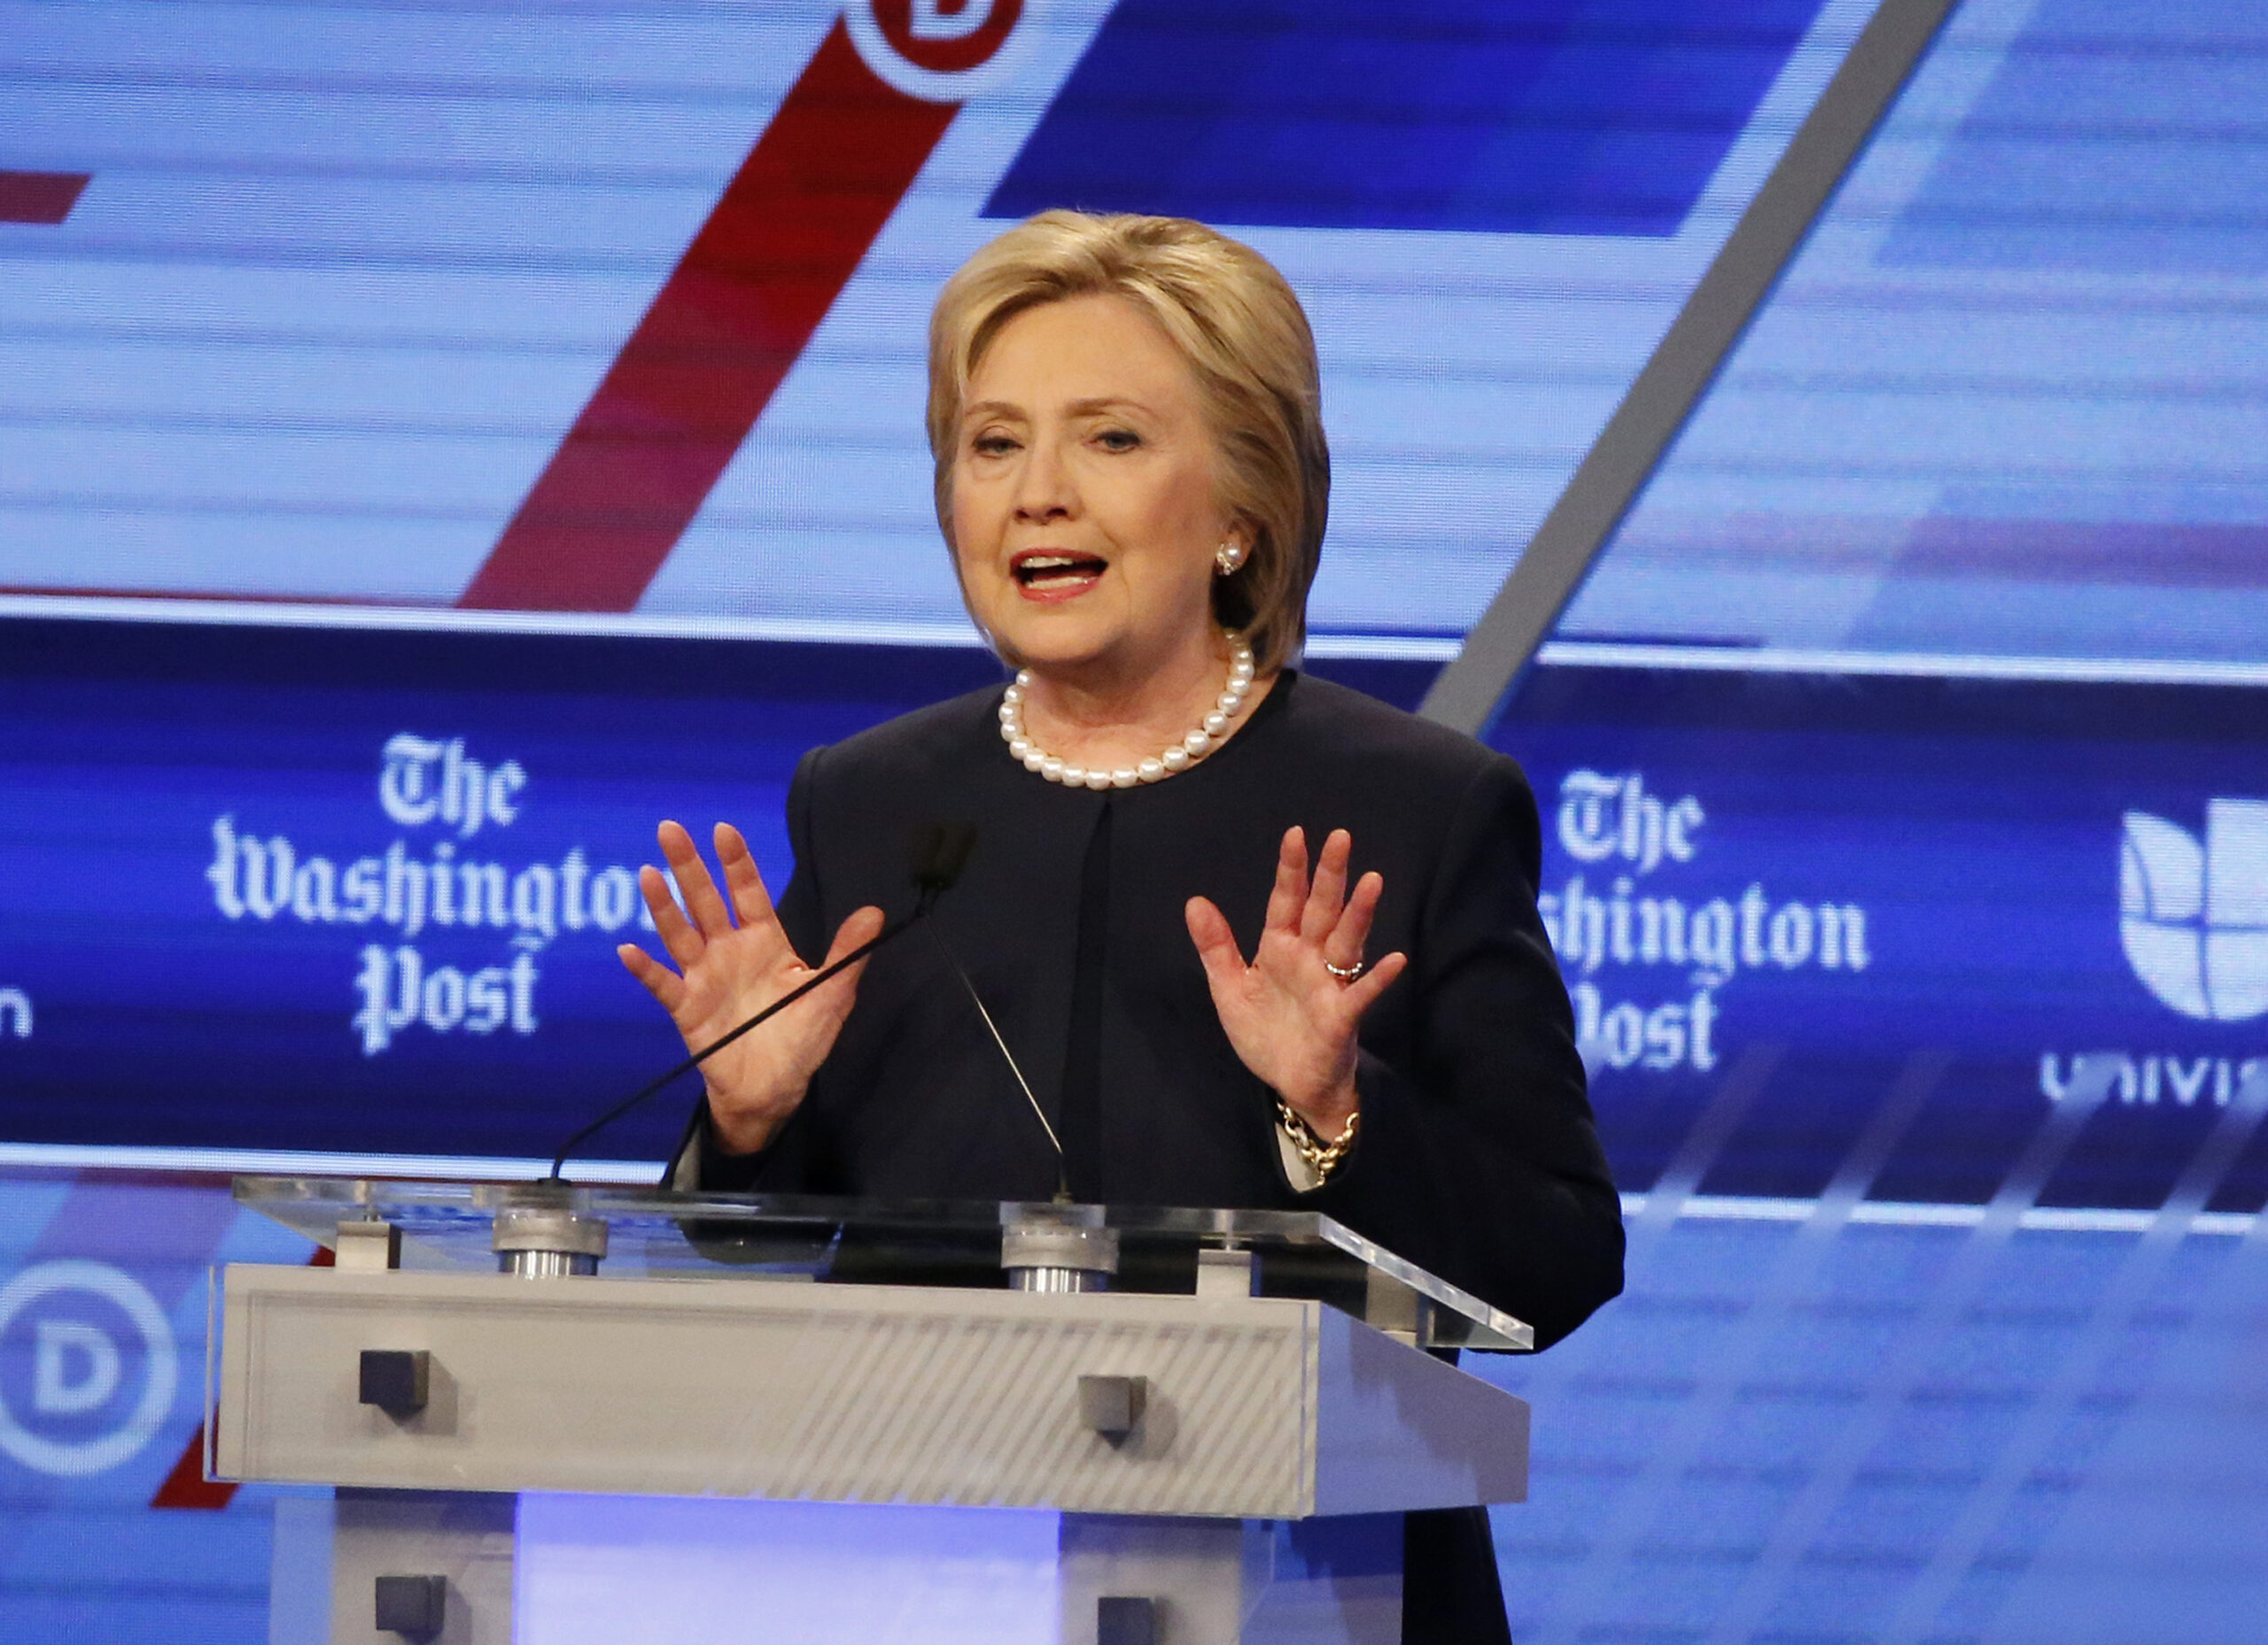 Democratic presidential candidate Hillary Clinton speaks during the Democratic presidential debate in Miami, March 2016